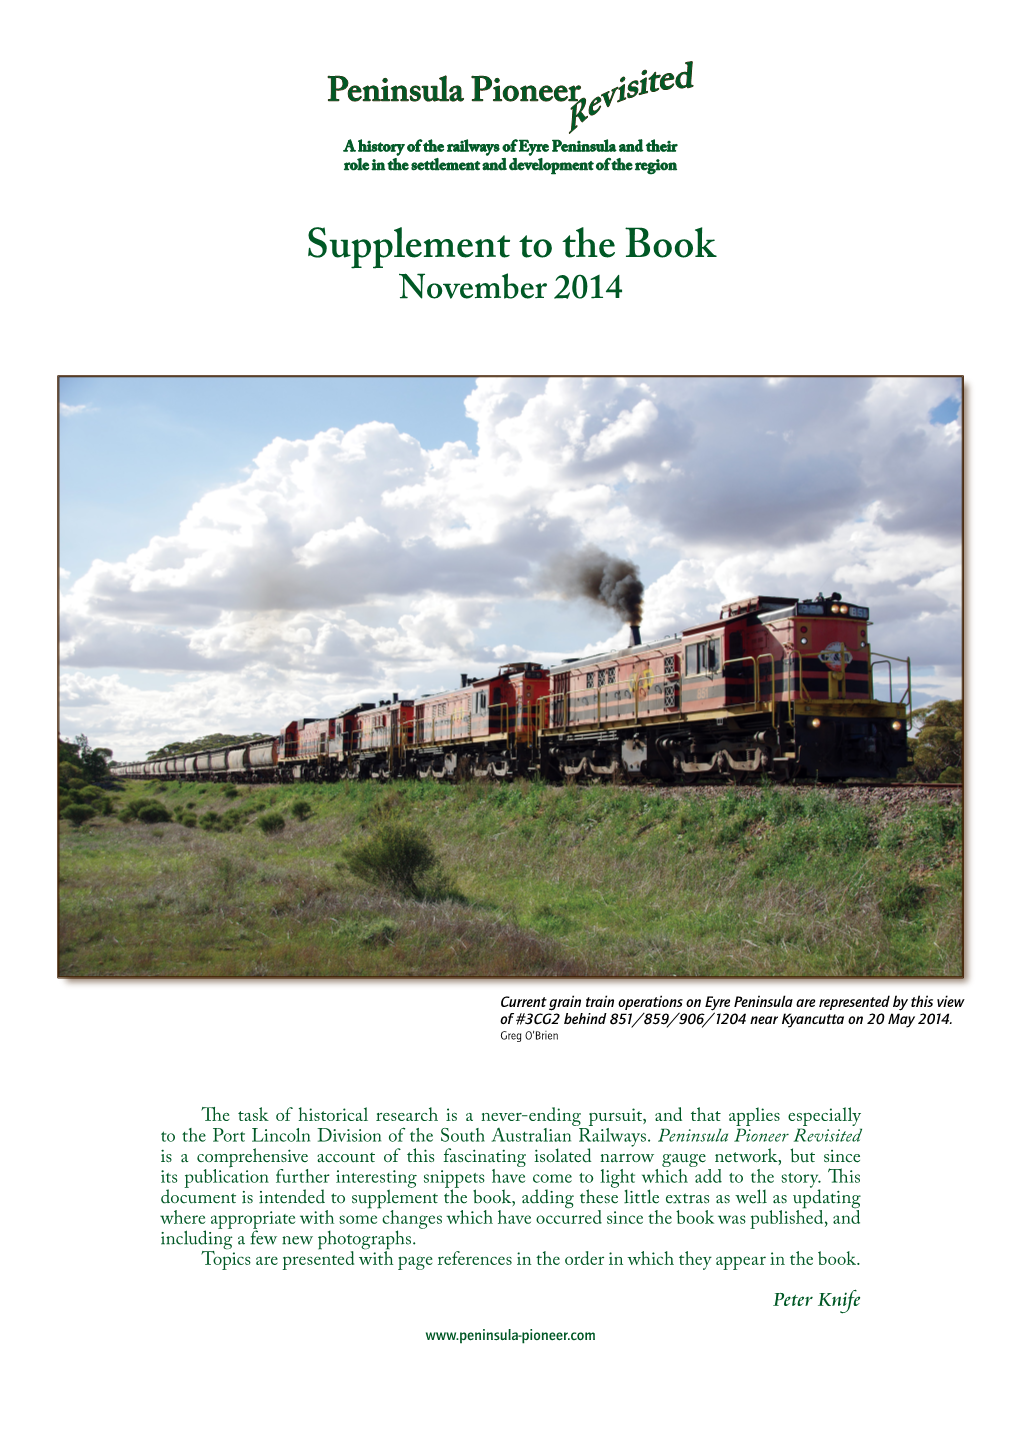 Supplement to the Book November 2014